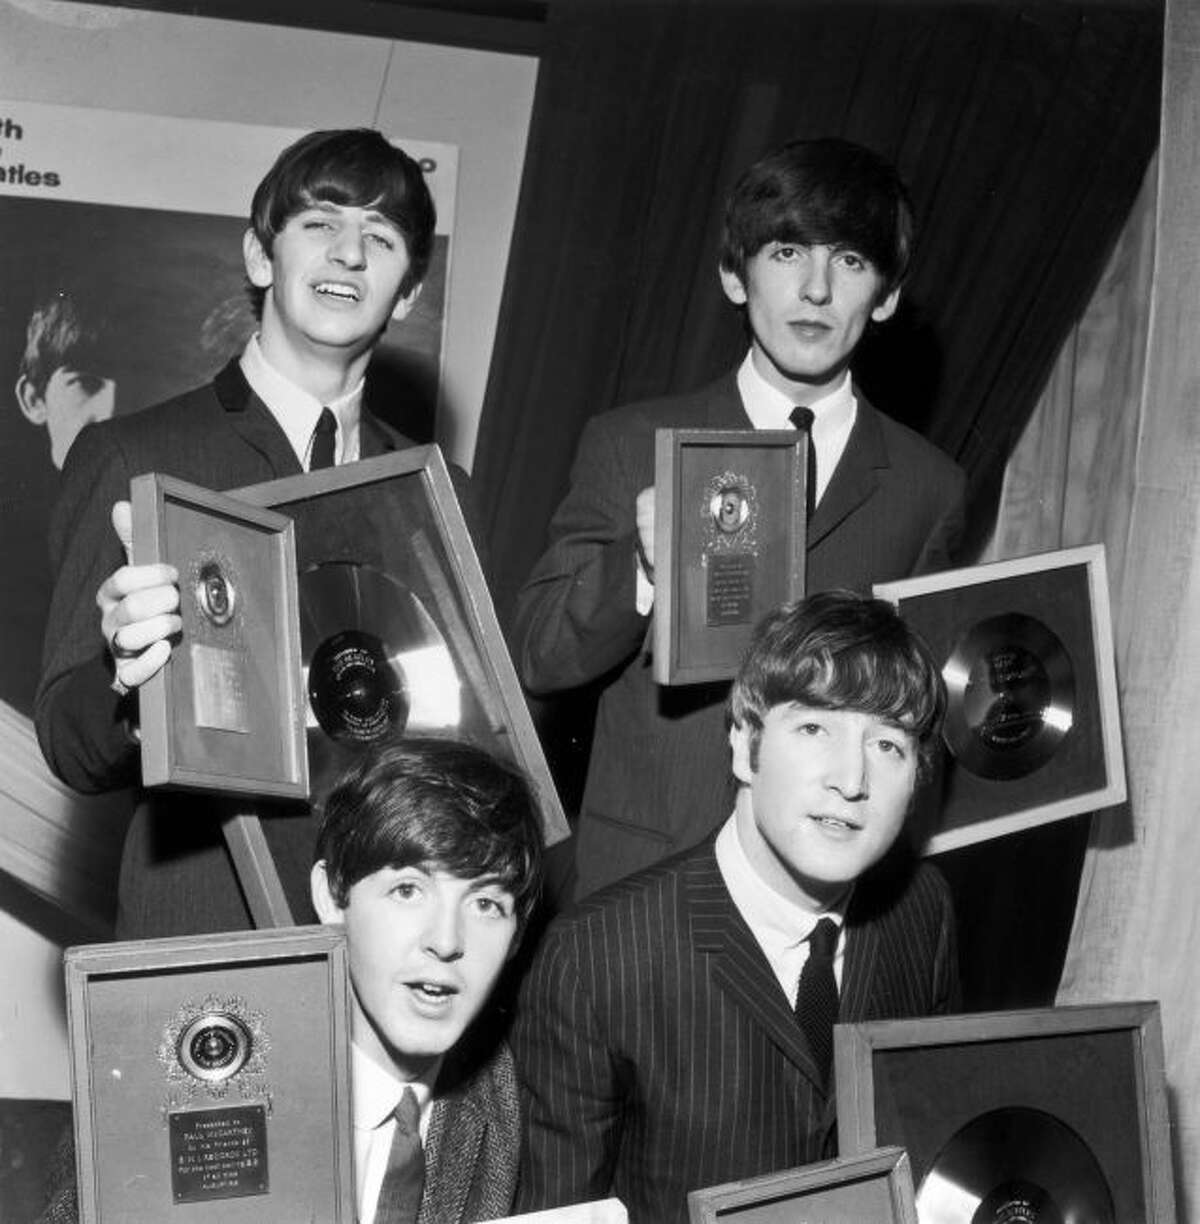 The Beatles holding their silver LP and EP discs presented to them by EMI records in London to mark sales of records including the LP “Please Please Me” and “Twist And Shout,” the best-selling EP of all time. Clockwise from back left: Ringo Starr, George Harrison, John Lennon and Paul McCartney.